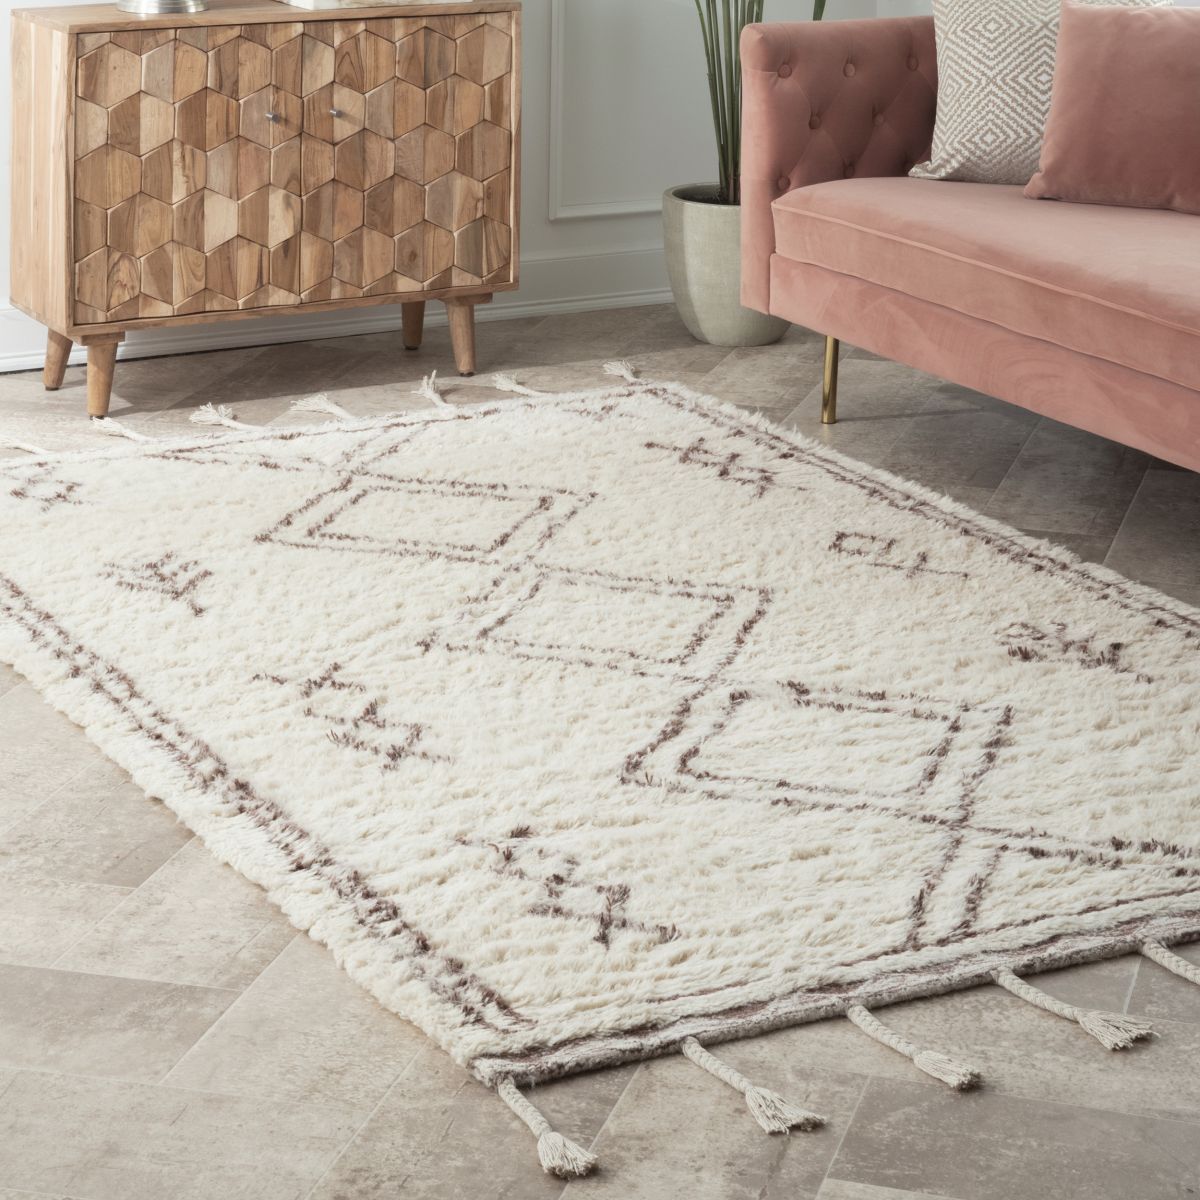 Beige Shaggy Double Helix With Tassels Area Rug | Rugs USA